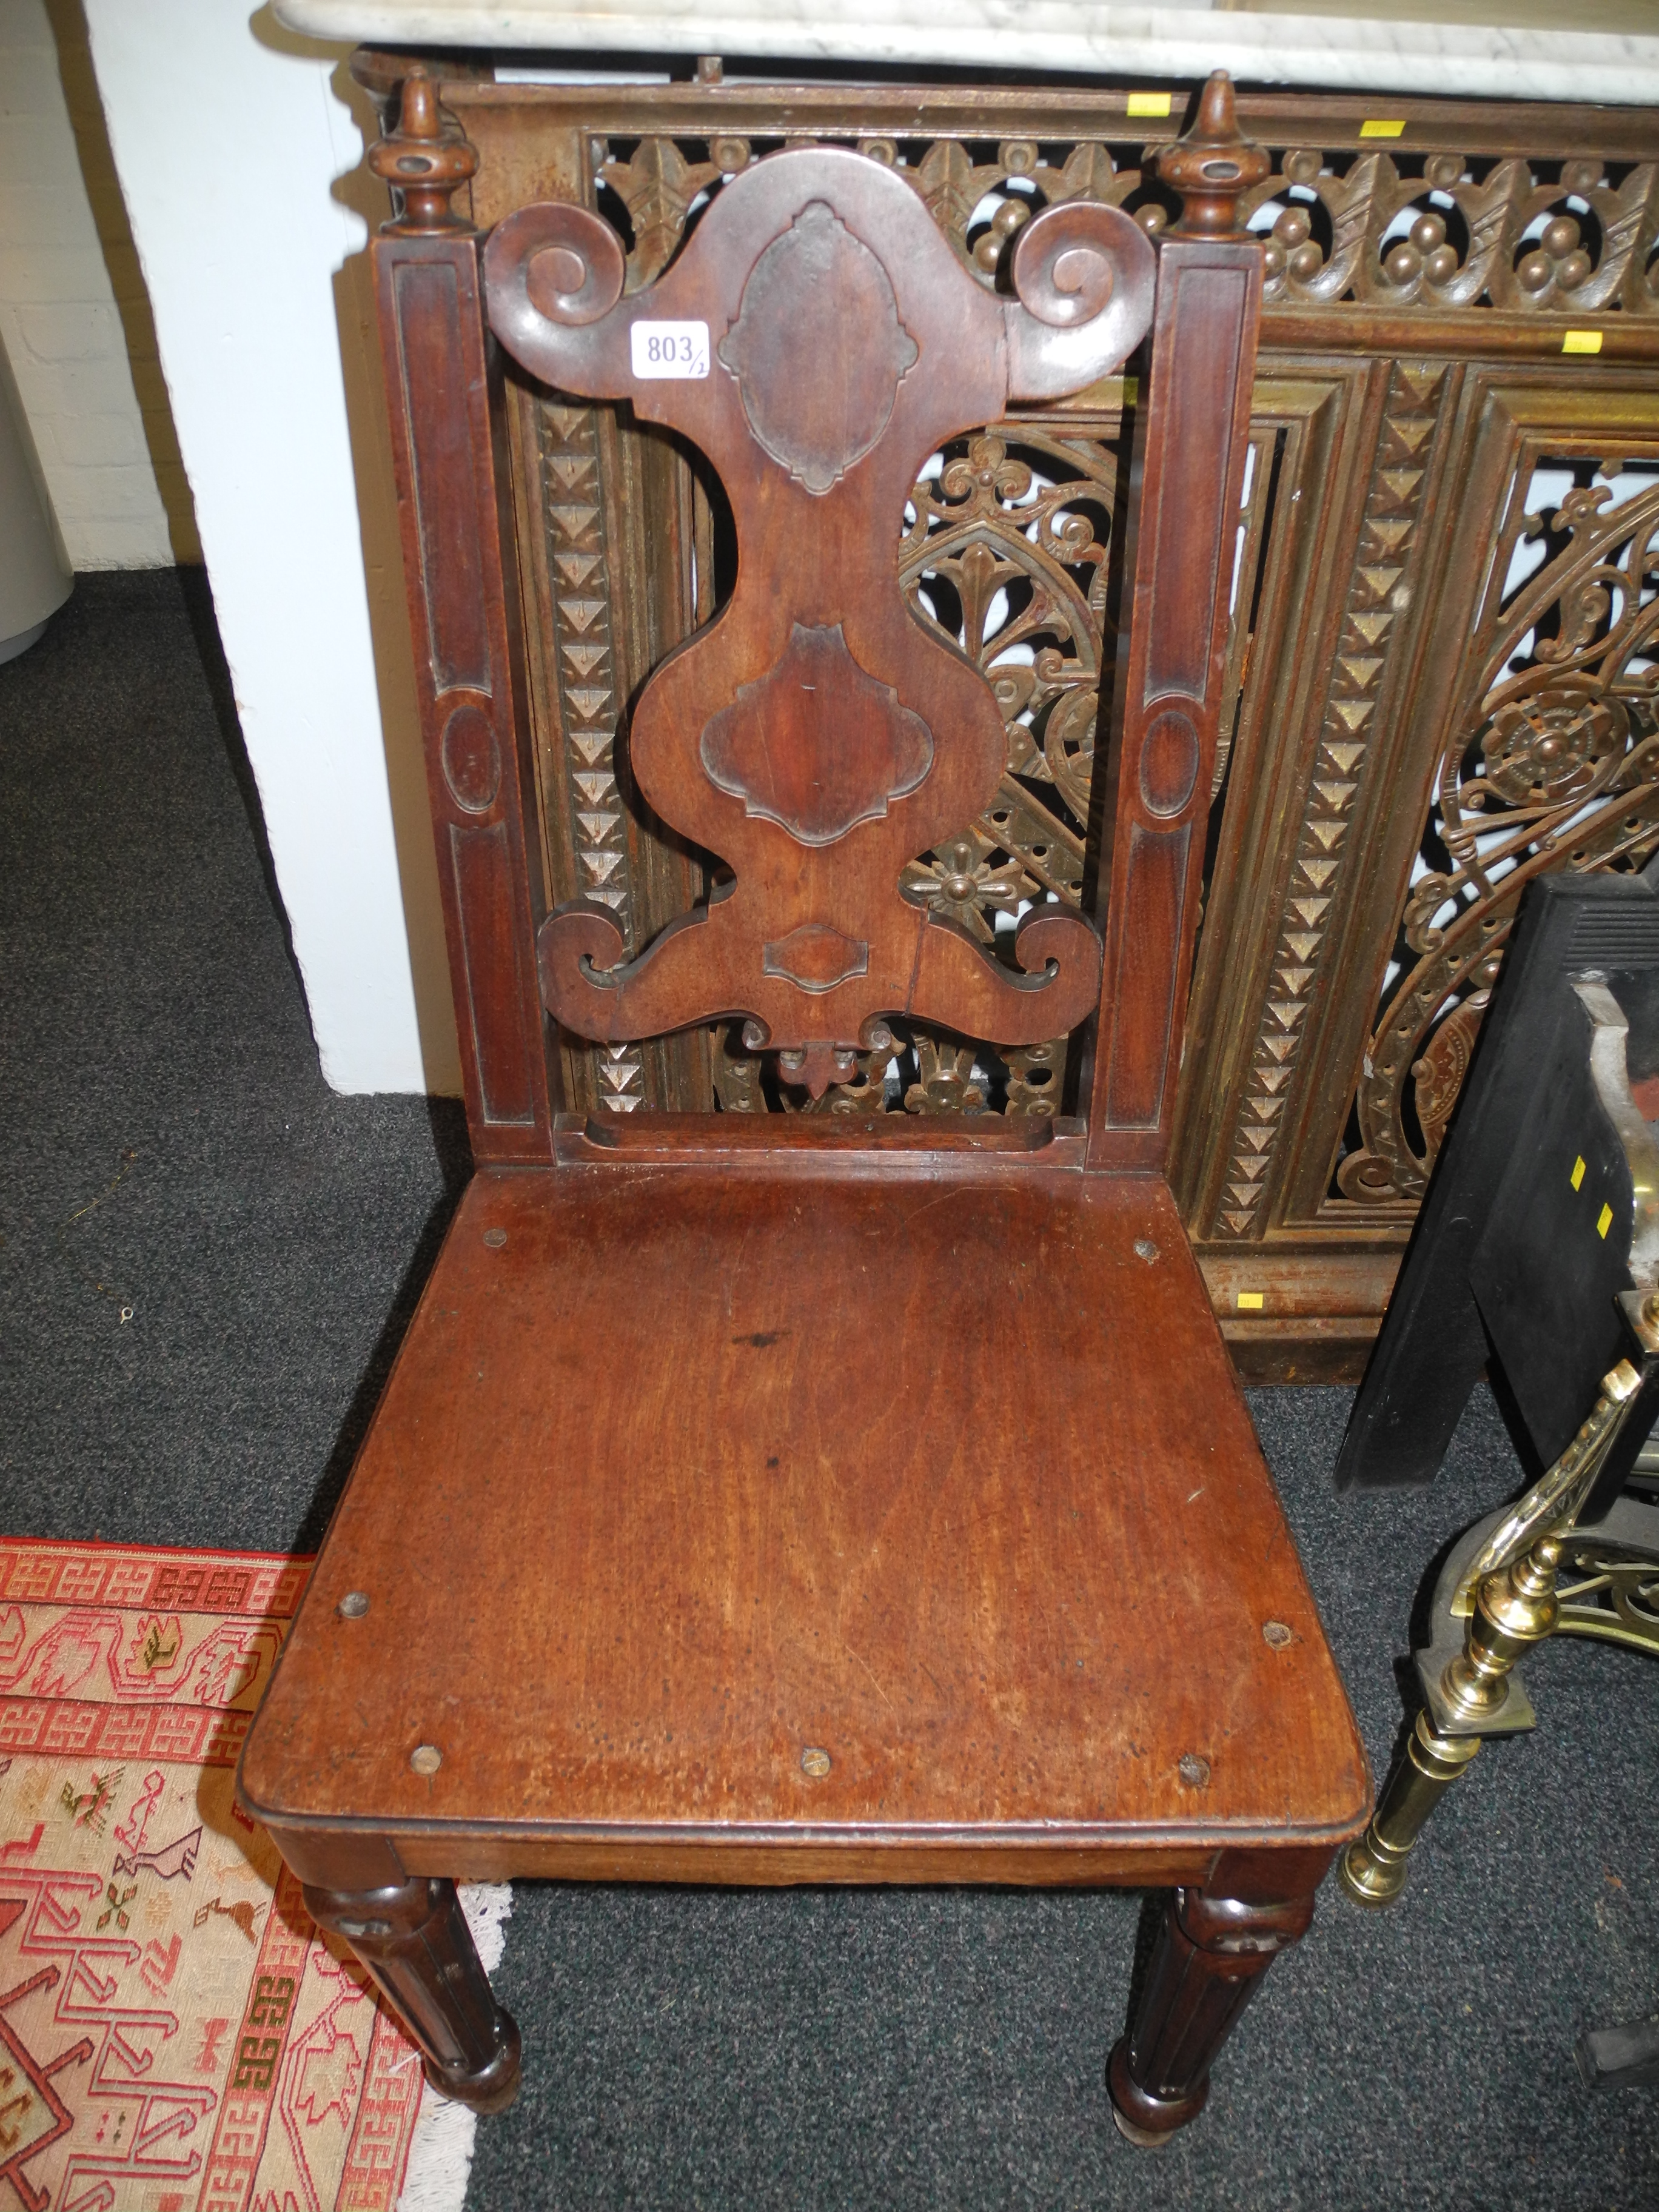 A pair of 19th Century solid seat mahogany chairs of Pugin influence, with finials above shaped